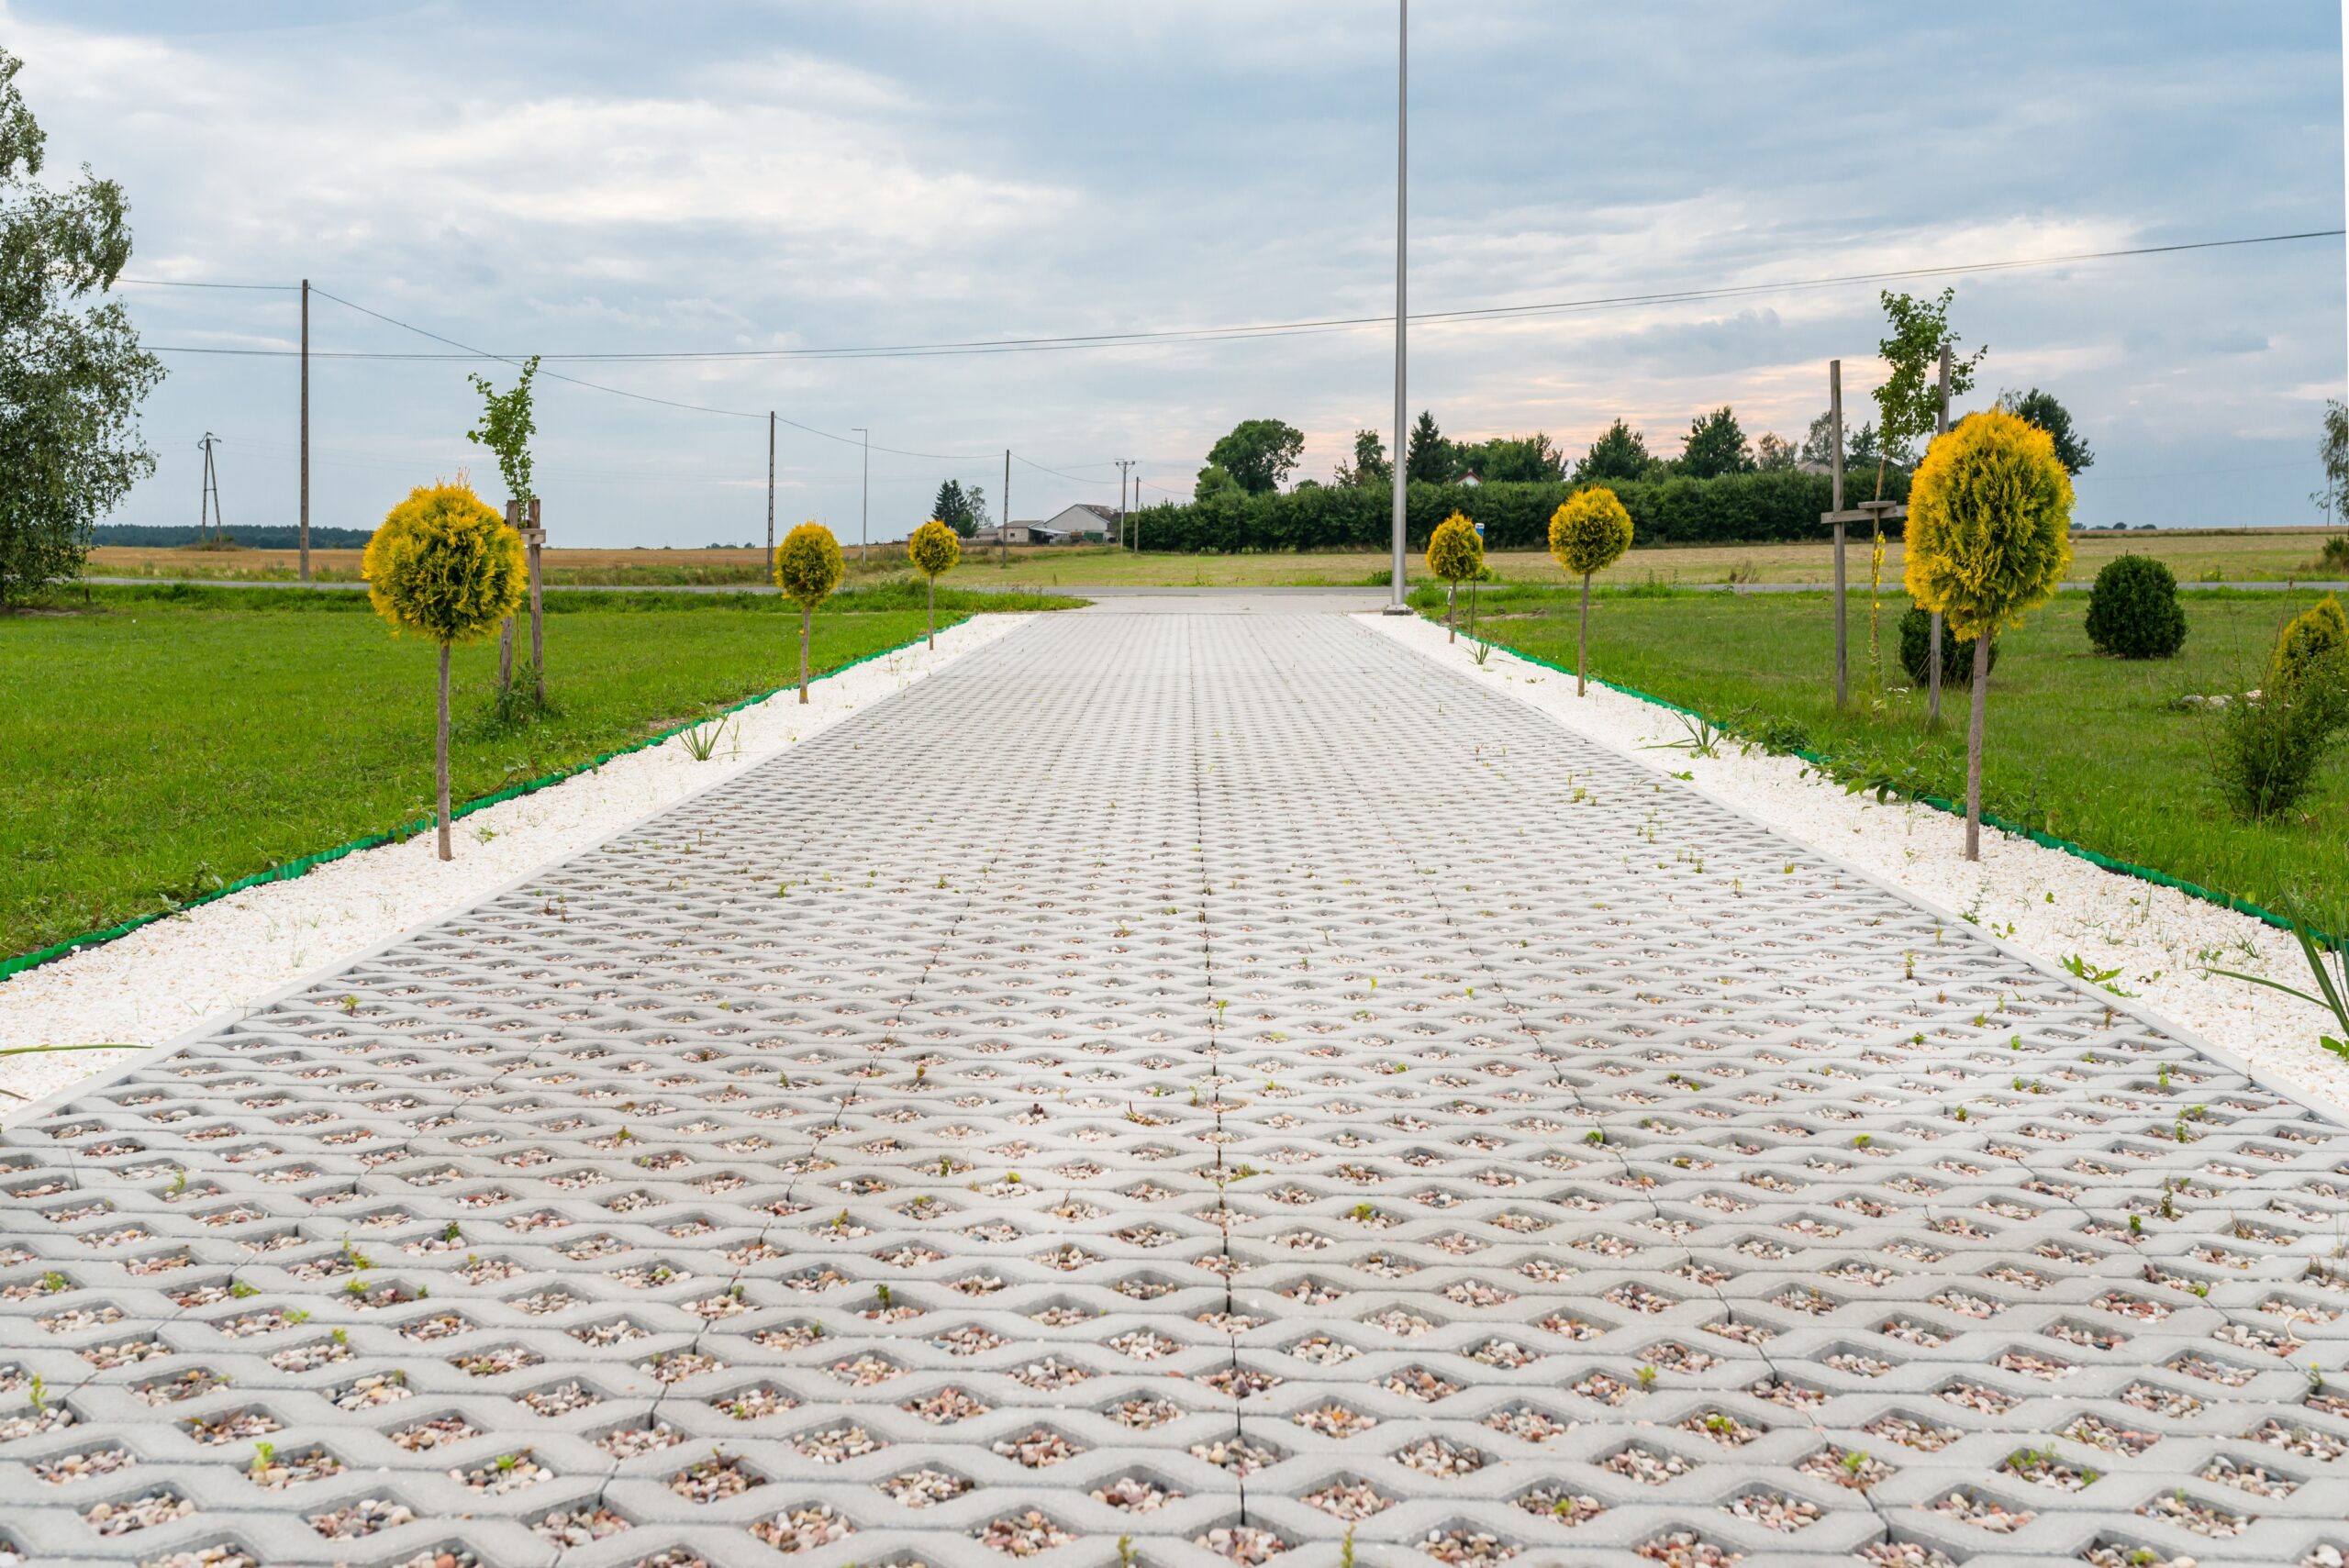 A concrete walkway in the middle of a grassy field.